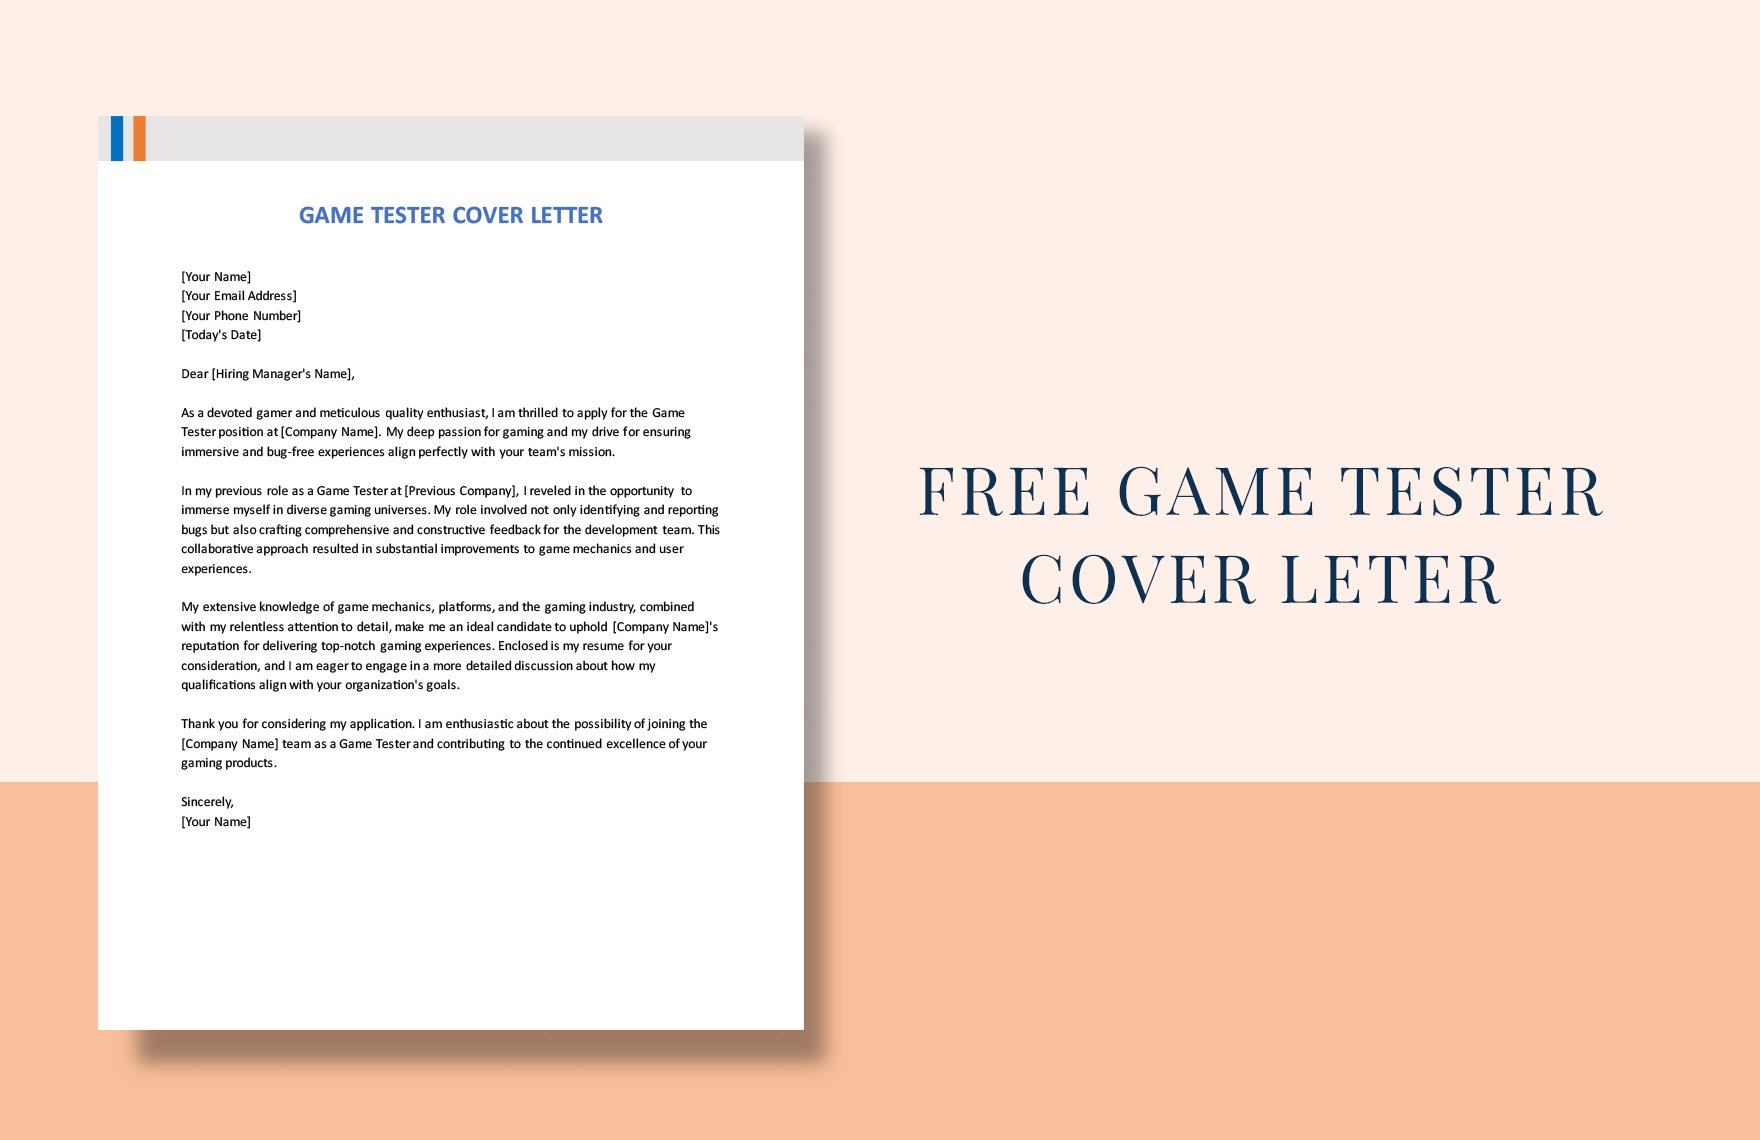 Game Tester Cover Letter in Word, Google Docs, PDF